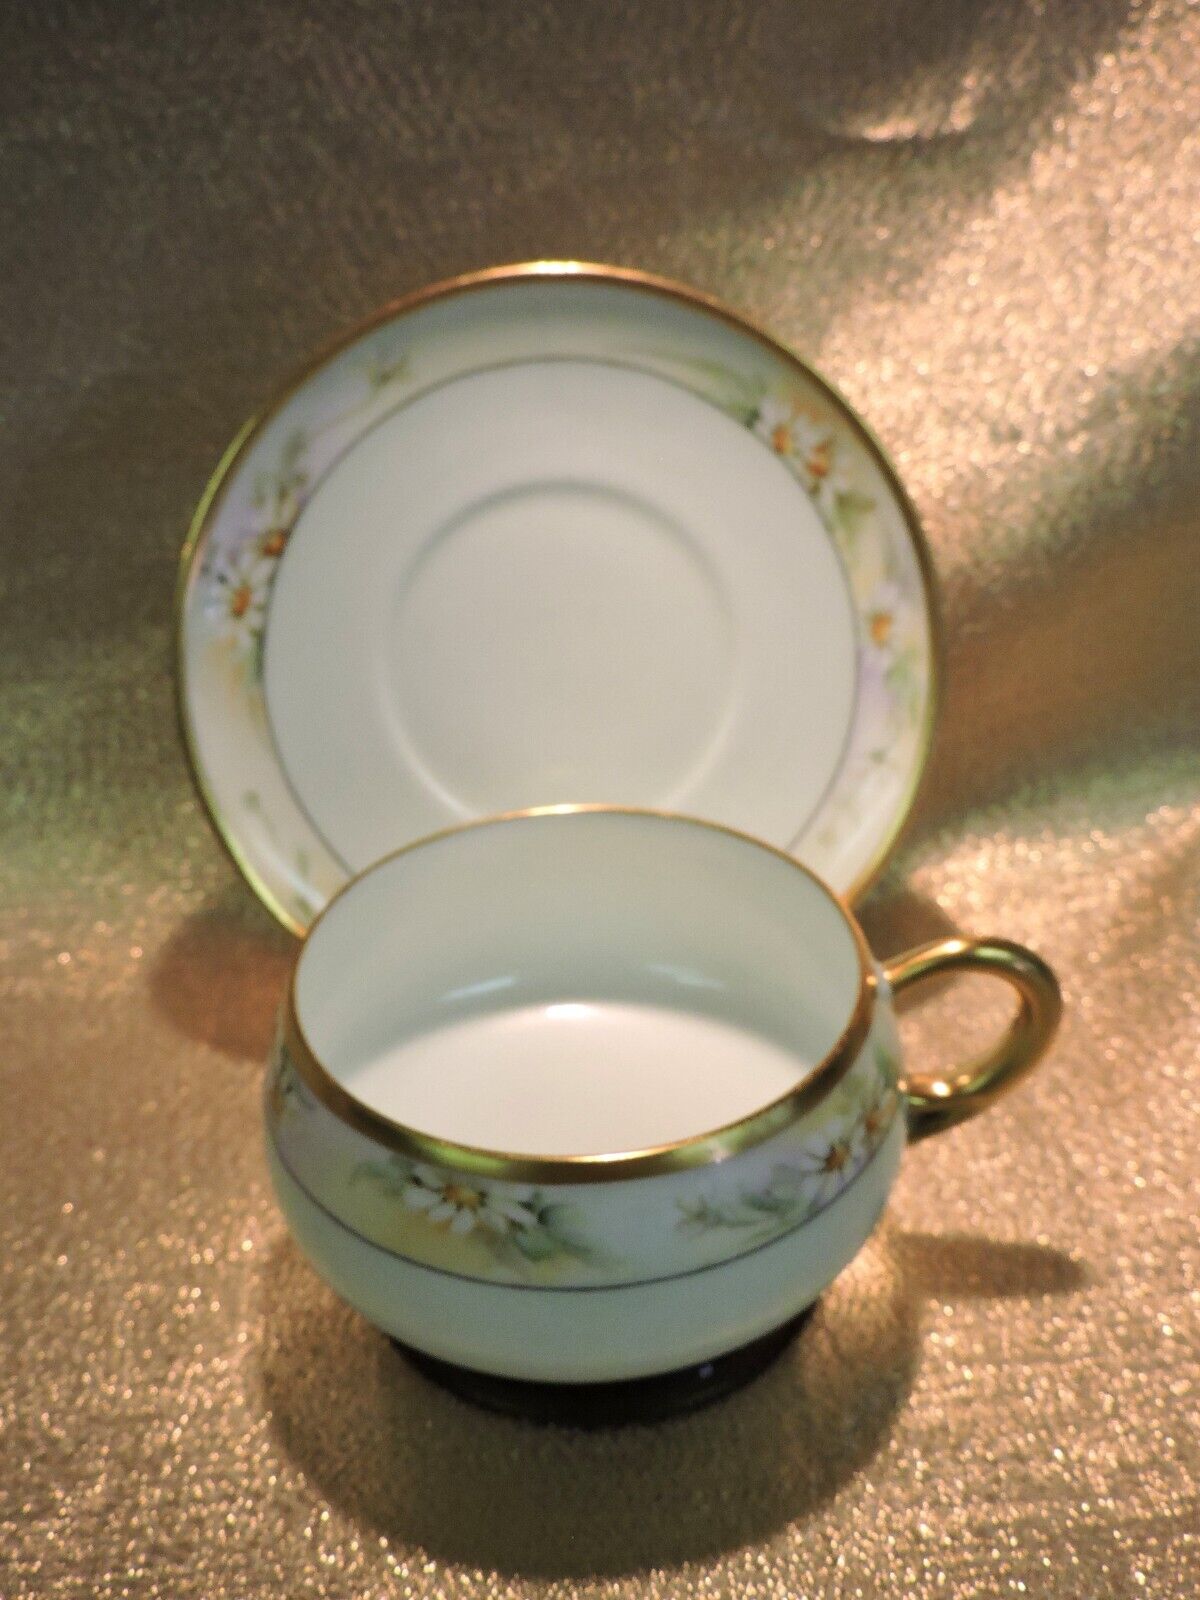 HC Royal Bavaria Teacup & Saucer - Pale Green / White Flowers / Gold Band Signed